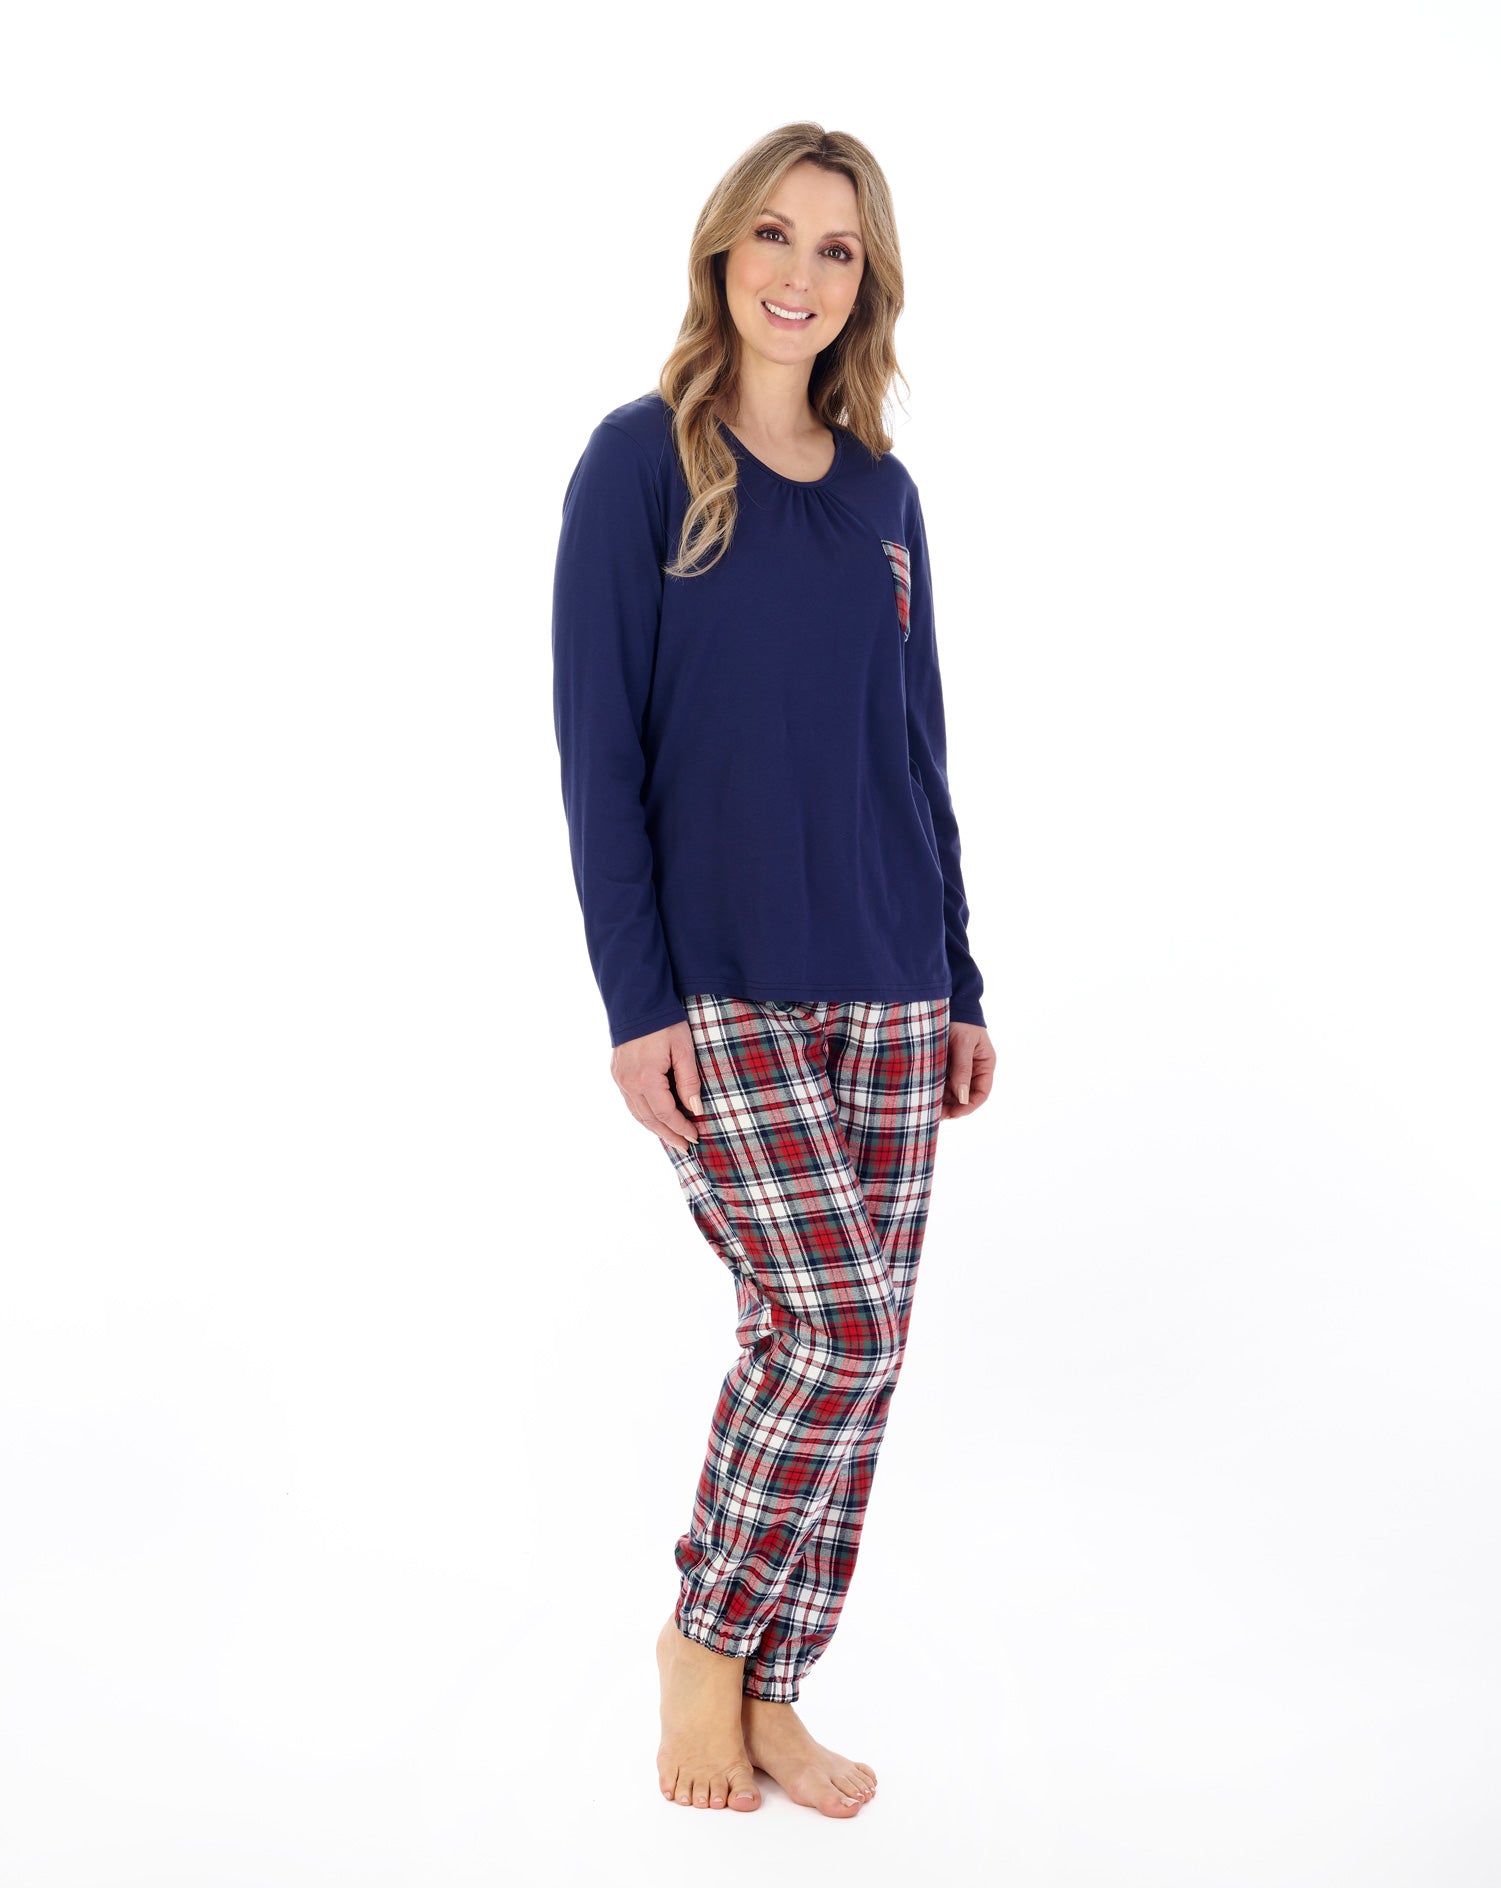 Woven Cotton Check and Solid Colour Jersey Top Pyjama PJ04221